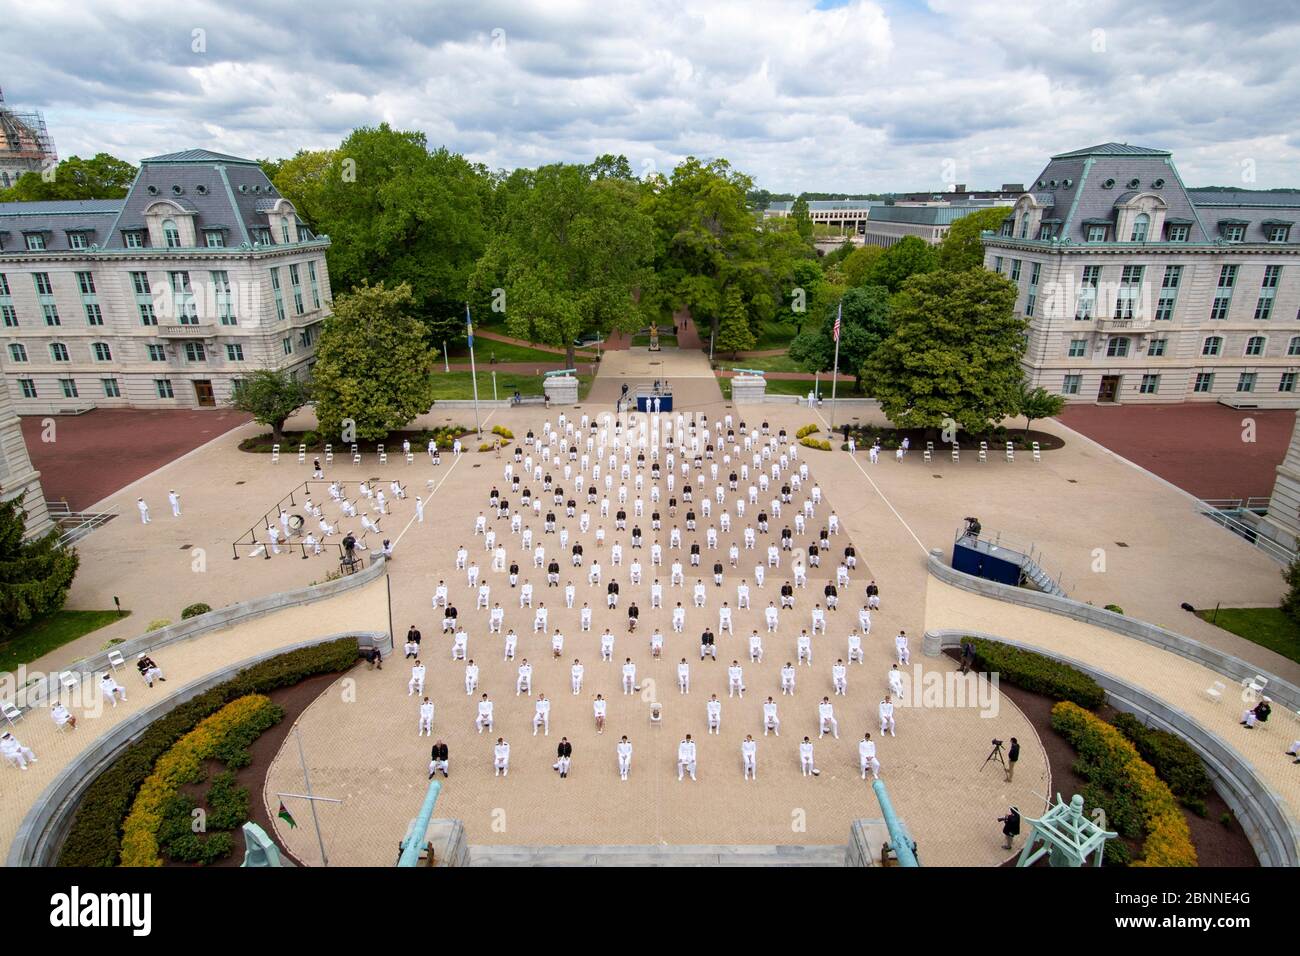 U.S Naval Academy graduates during the 2020 graduation and commissioning ceremony under COVID-19, coronavirus pandemic social distancing rules May 12, 2020 in Annapolis, Maryland. Approximately 1,000 midshipmen will graduate and be sworn-in during five events and one virtual ceremony. Stock Photo